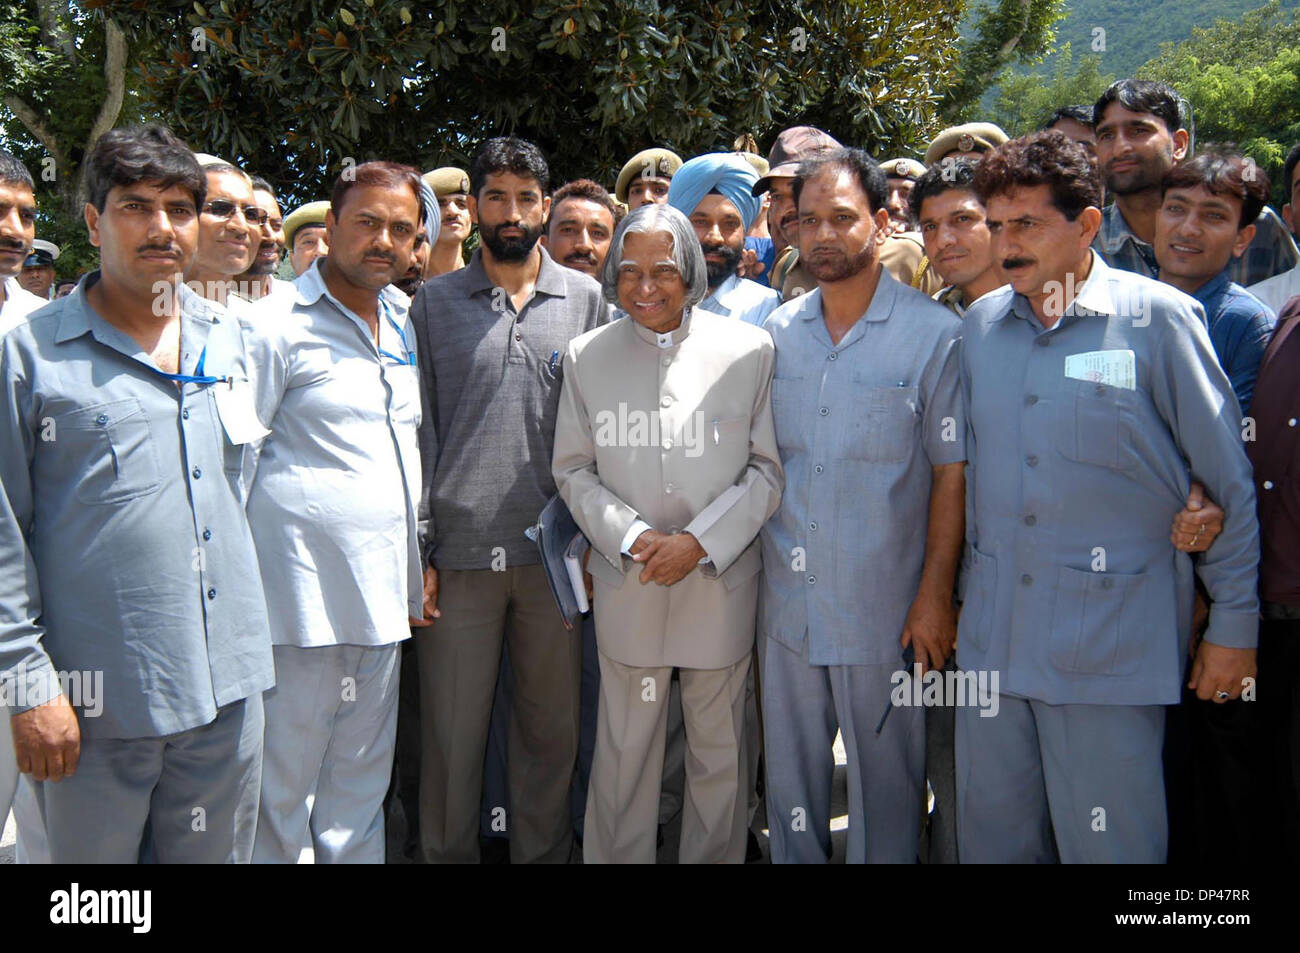 Jul 29, 2006; Srinagar, Kashmir, INDIA; Indian President A.P.J. ABDUL KALAM posing for a photograph with the governor's staff at governor house before meeting school children in Srinagar, the summer capital of Indian Kashmir, Saturday, 29 July, 2006. A strike called by various separatist groups to protest the visit by the Indian President brought life to a standstill in Srinagar fo Stock Photo